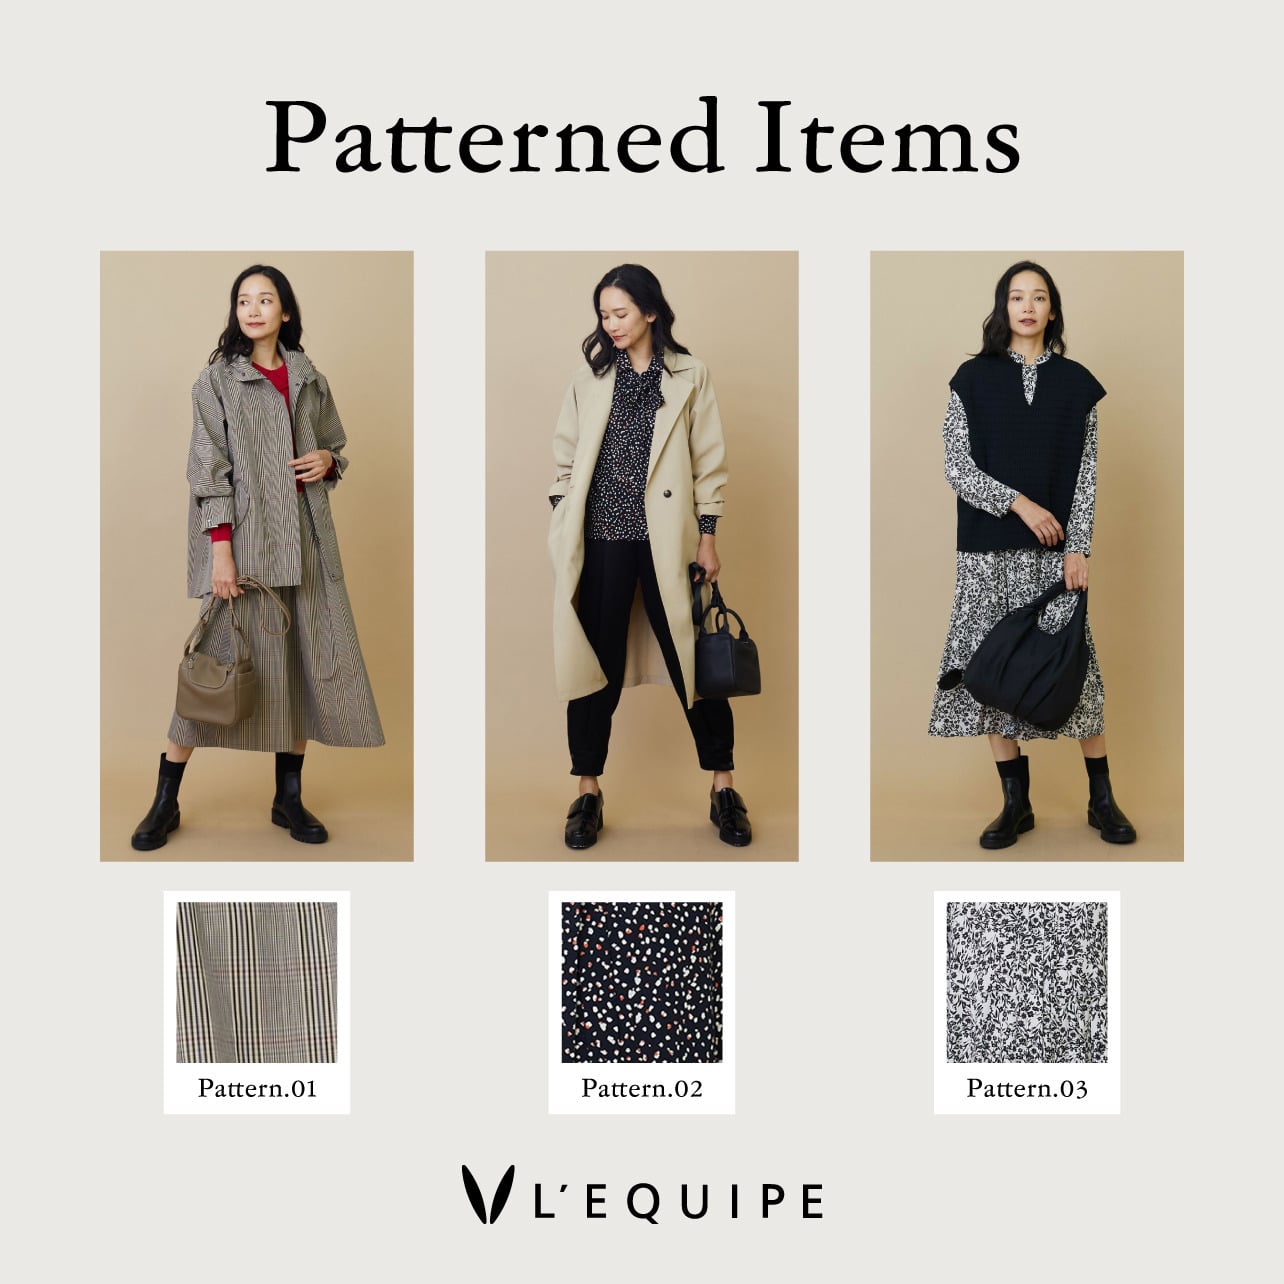 Patterned items